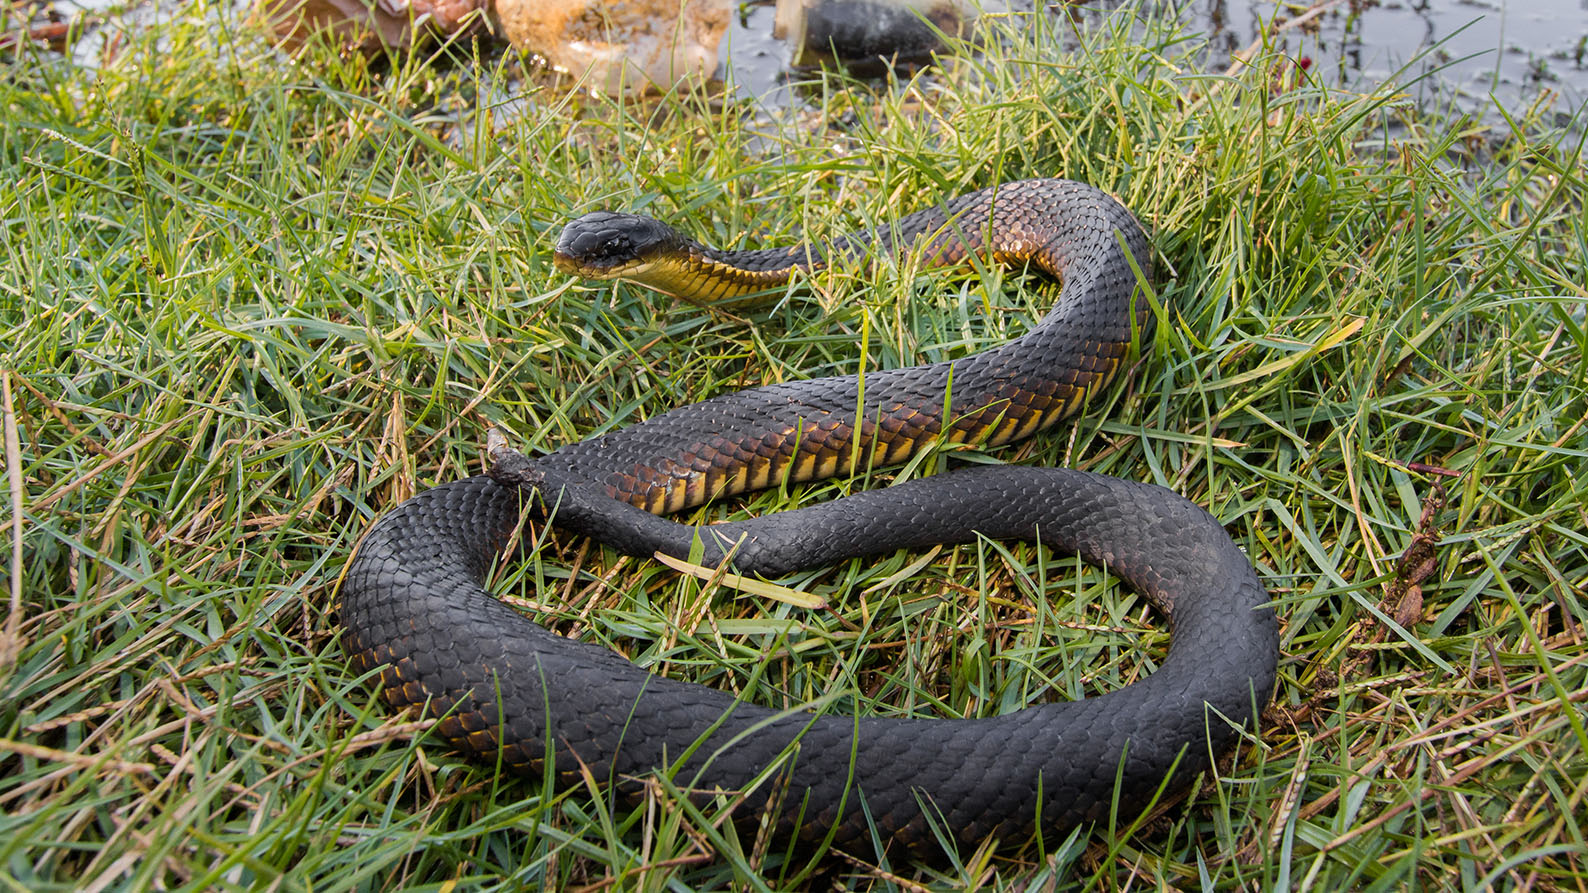 Image for Snakes more likely to inbreed and lose ability to adapt due to urbanisation